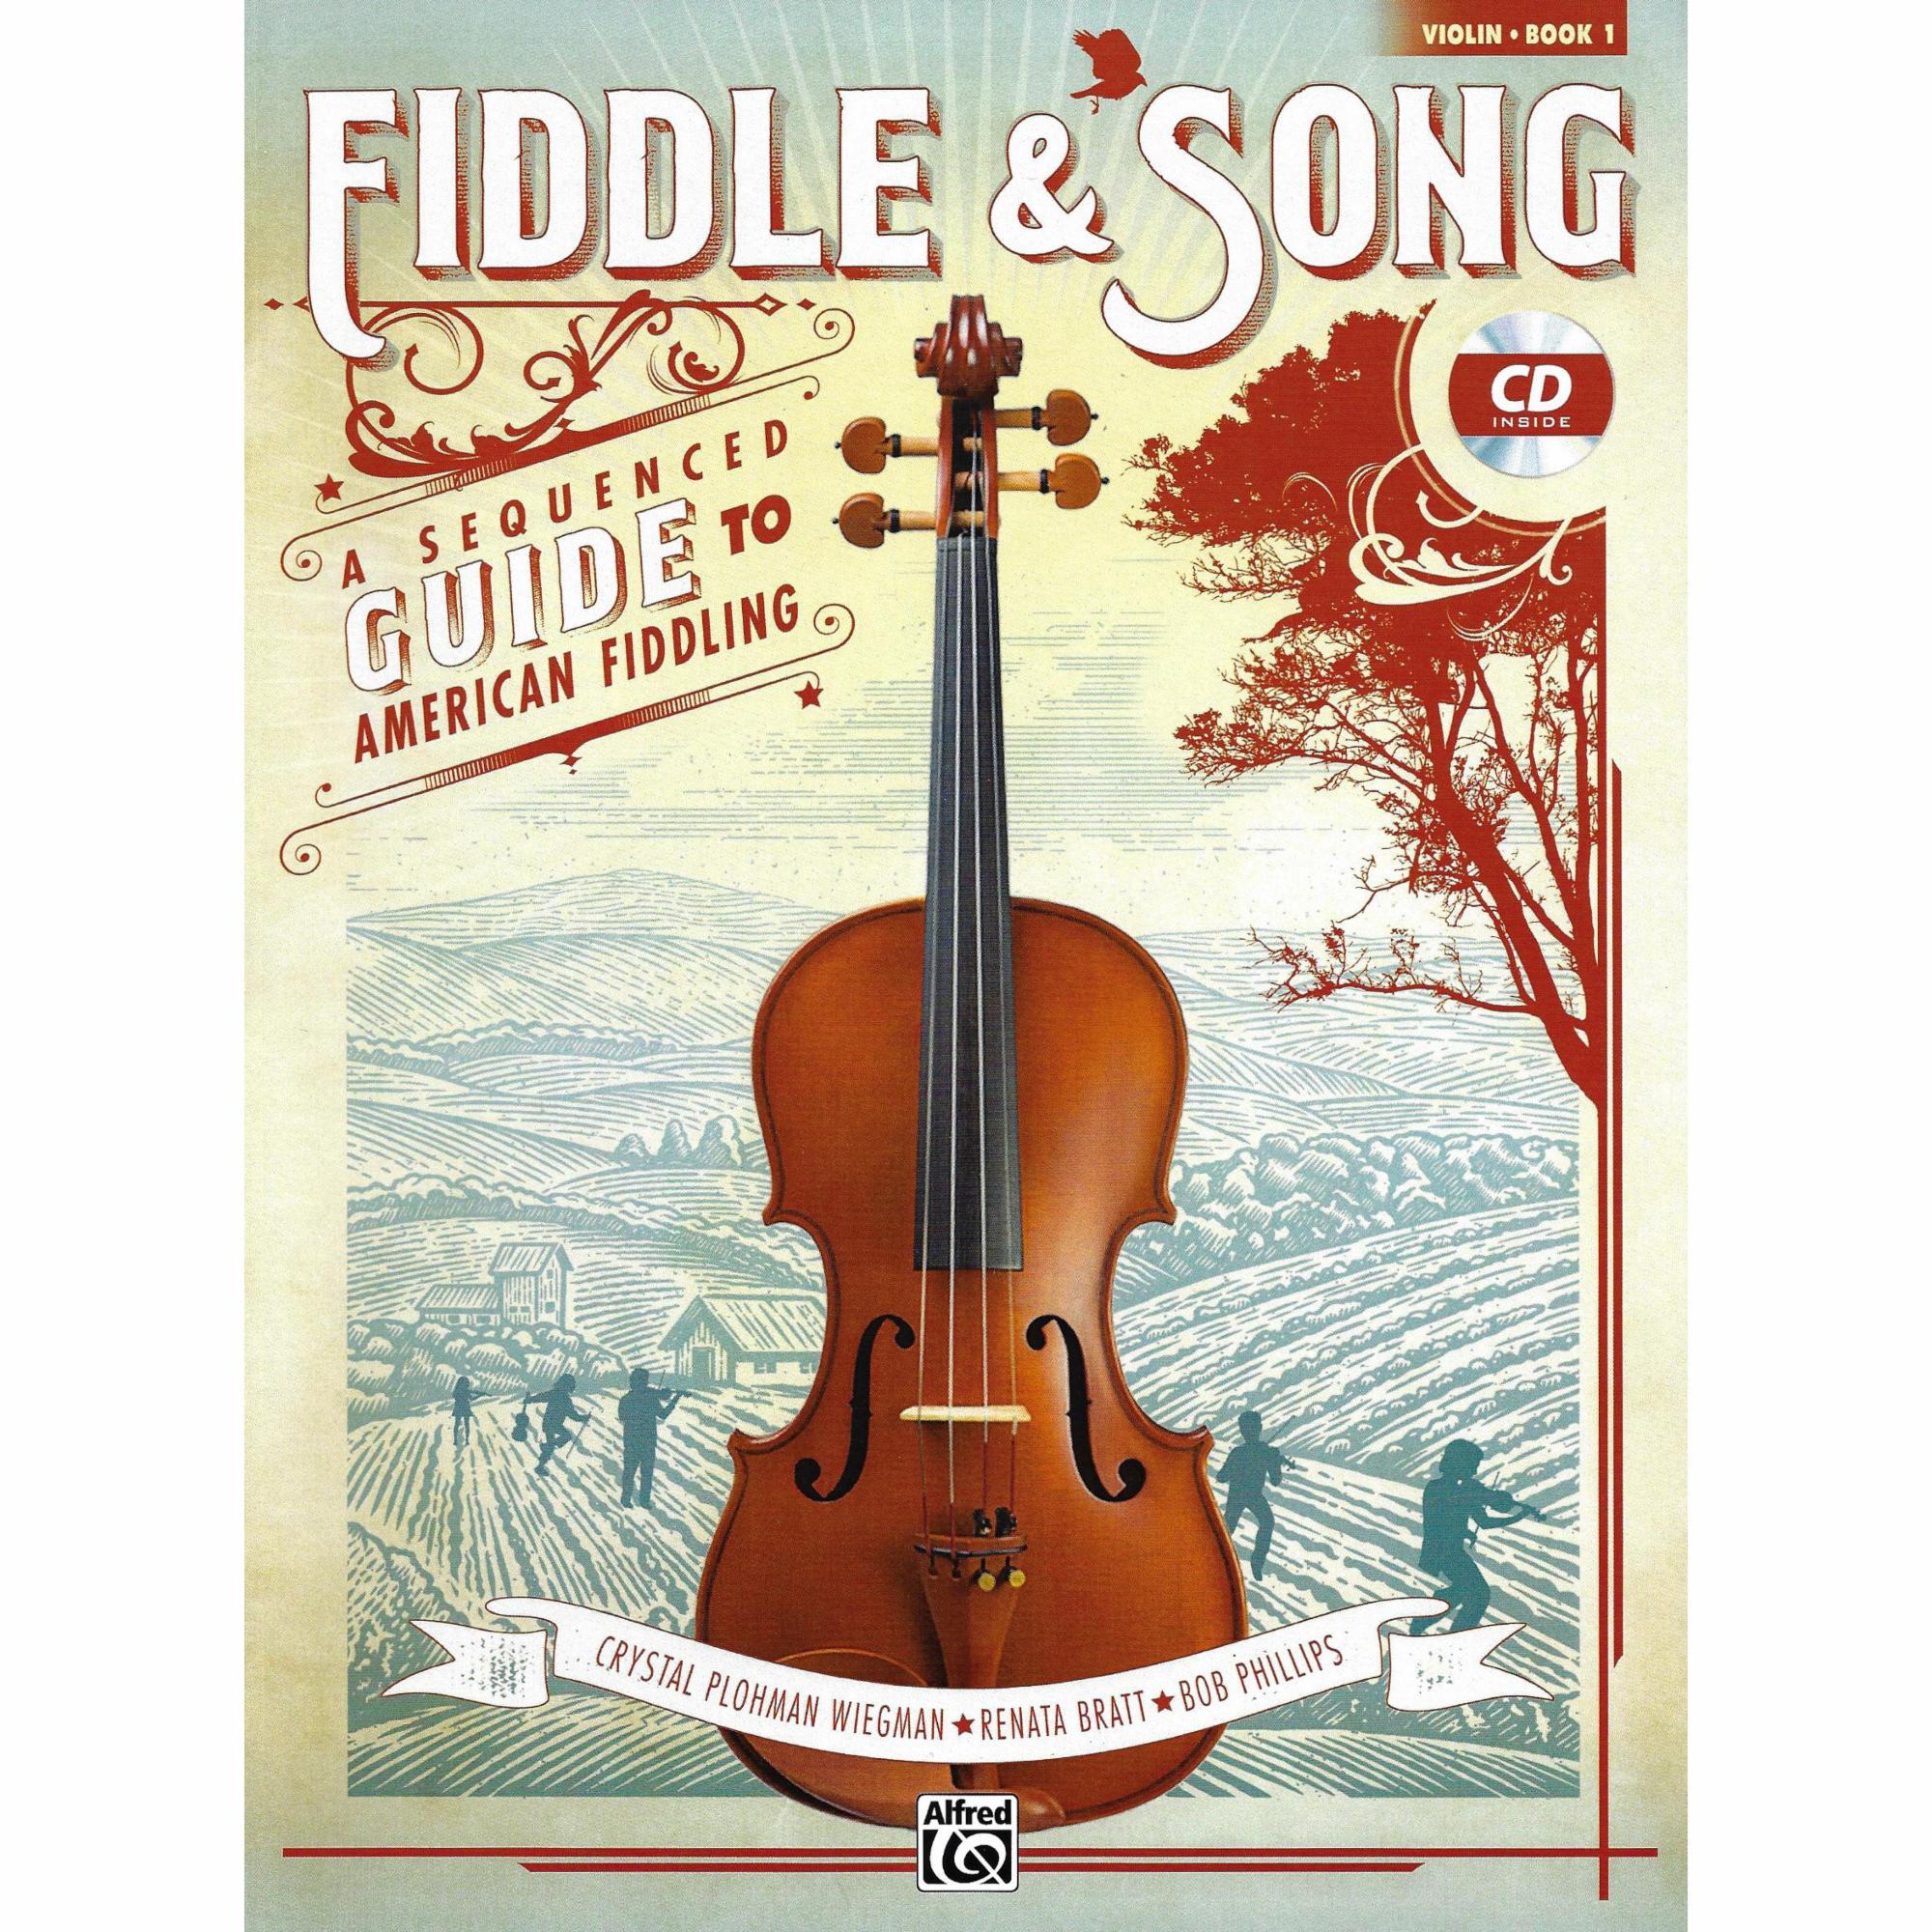 Fiddle & Song for Strings